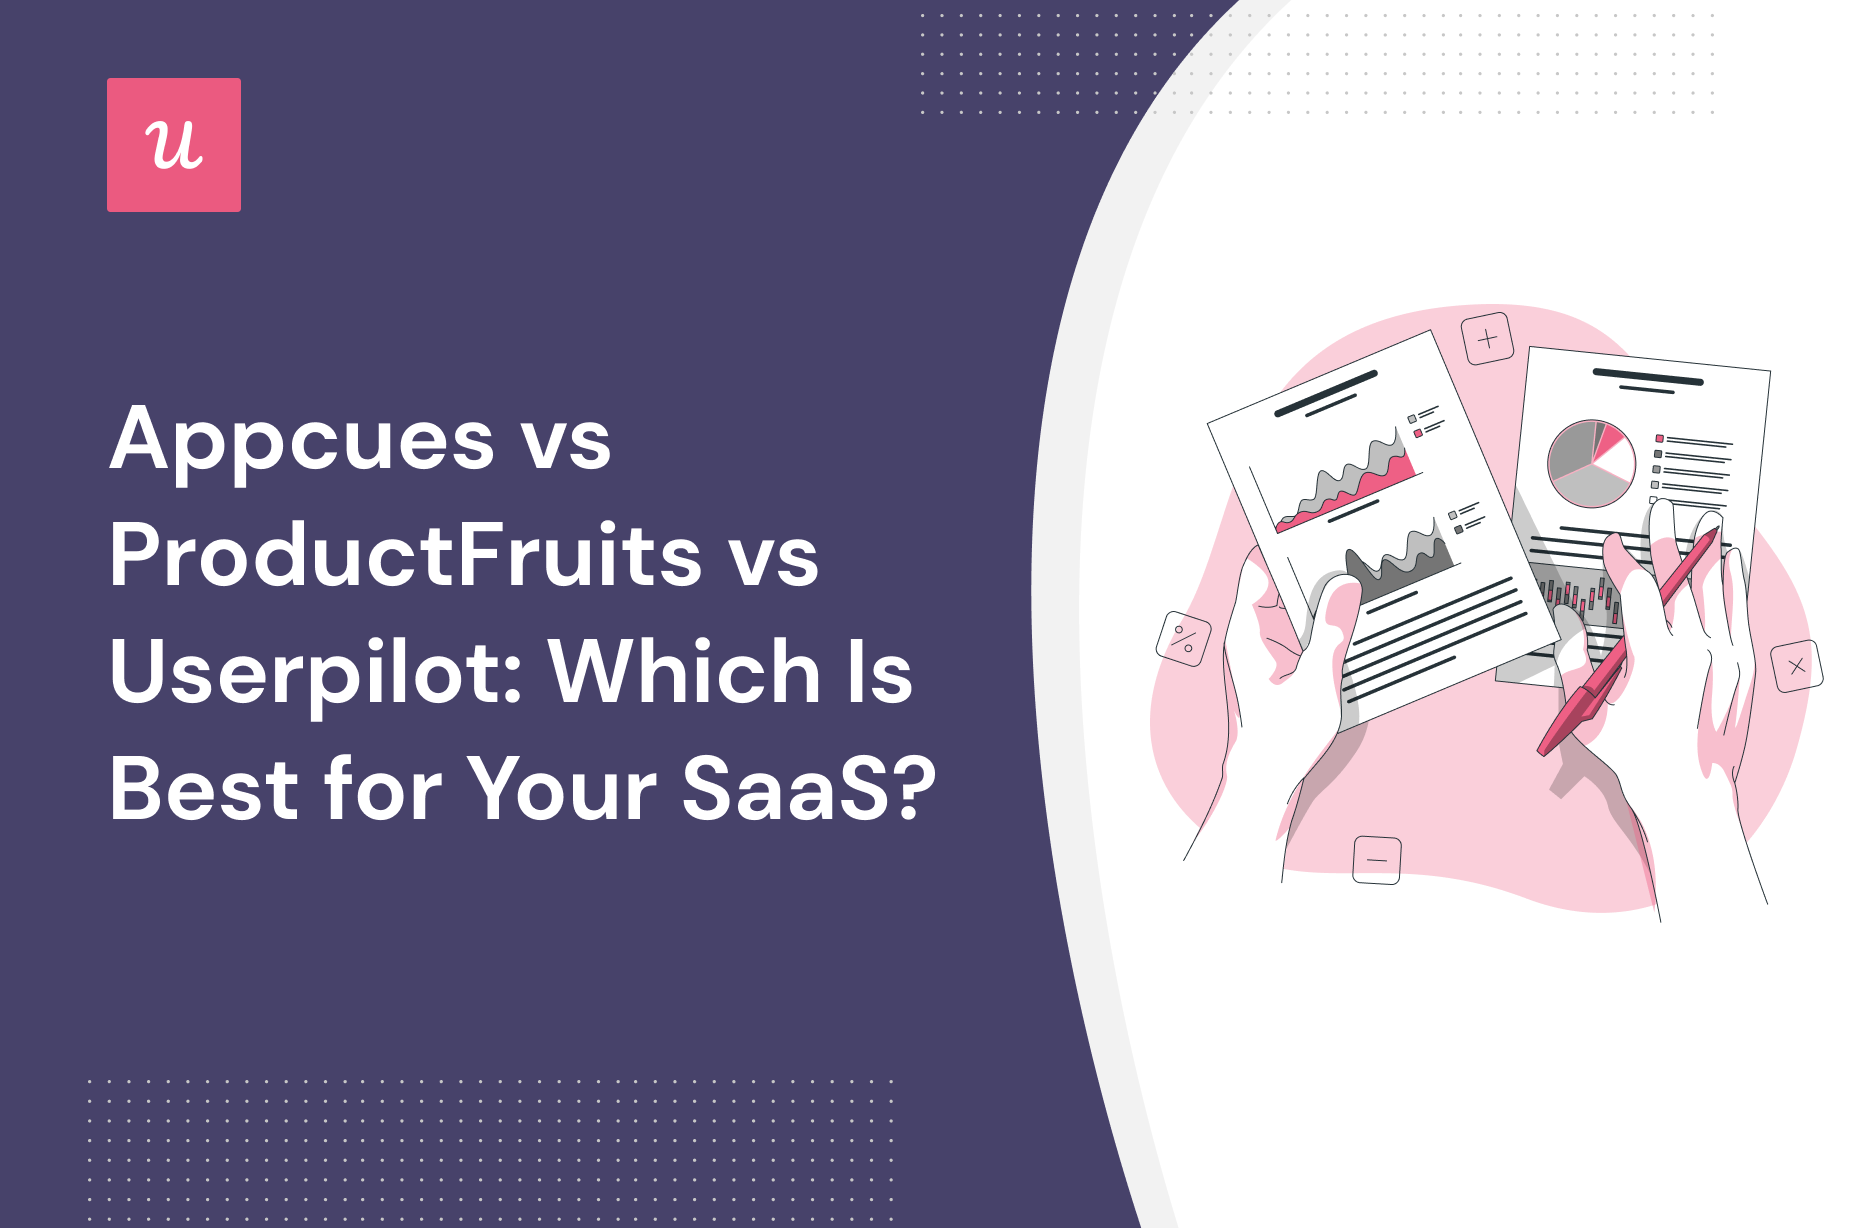 Appcues vs ProductFruits vs Userpilot: Which Is Best for Your SaaS?